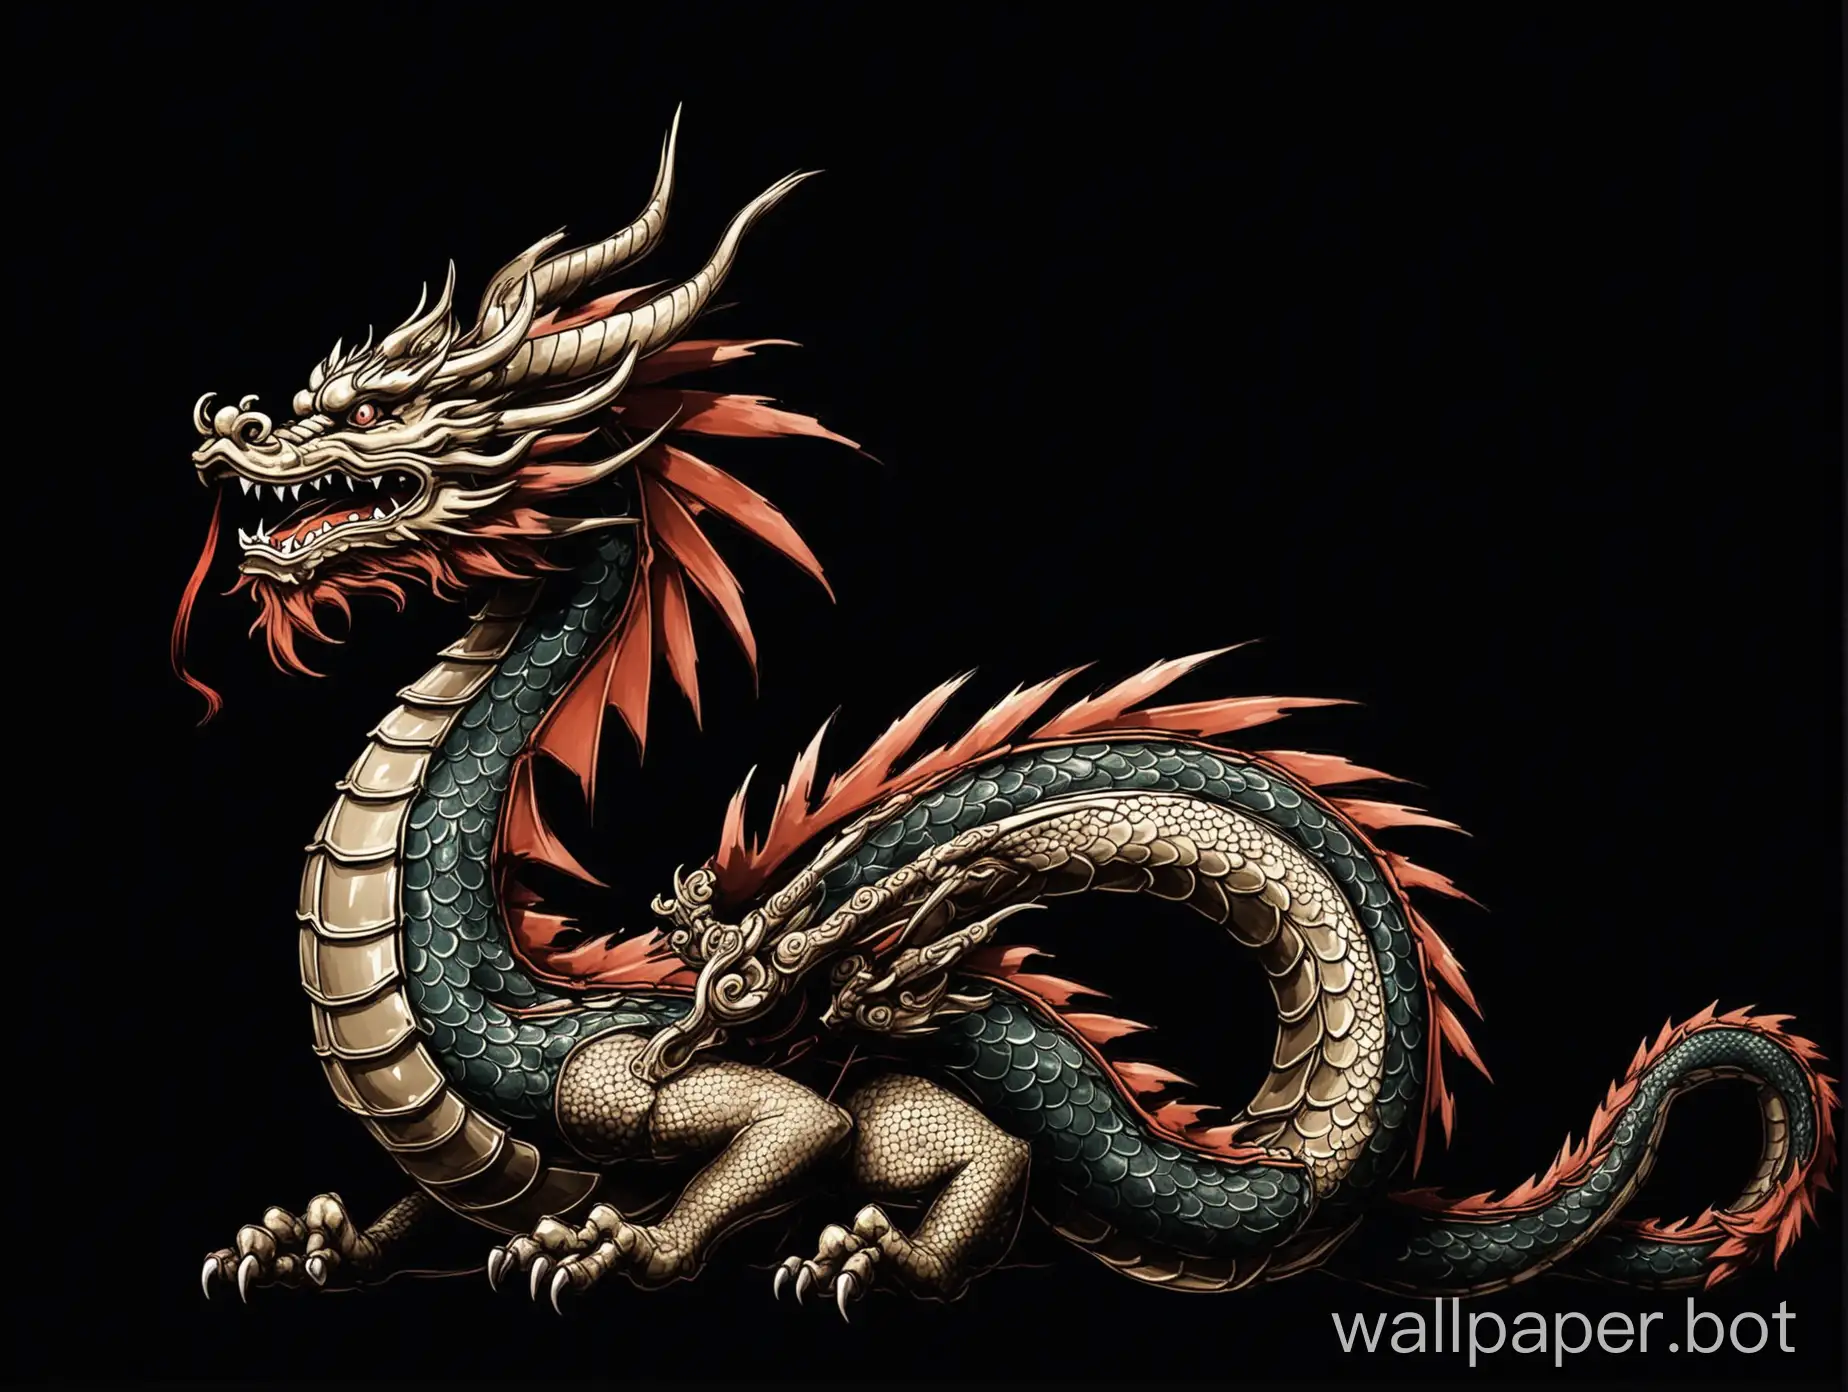 A japanese style dragon positioned at the right with a dark background